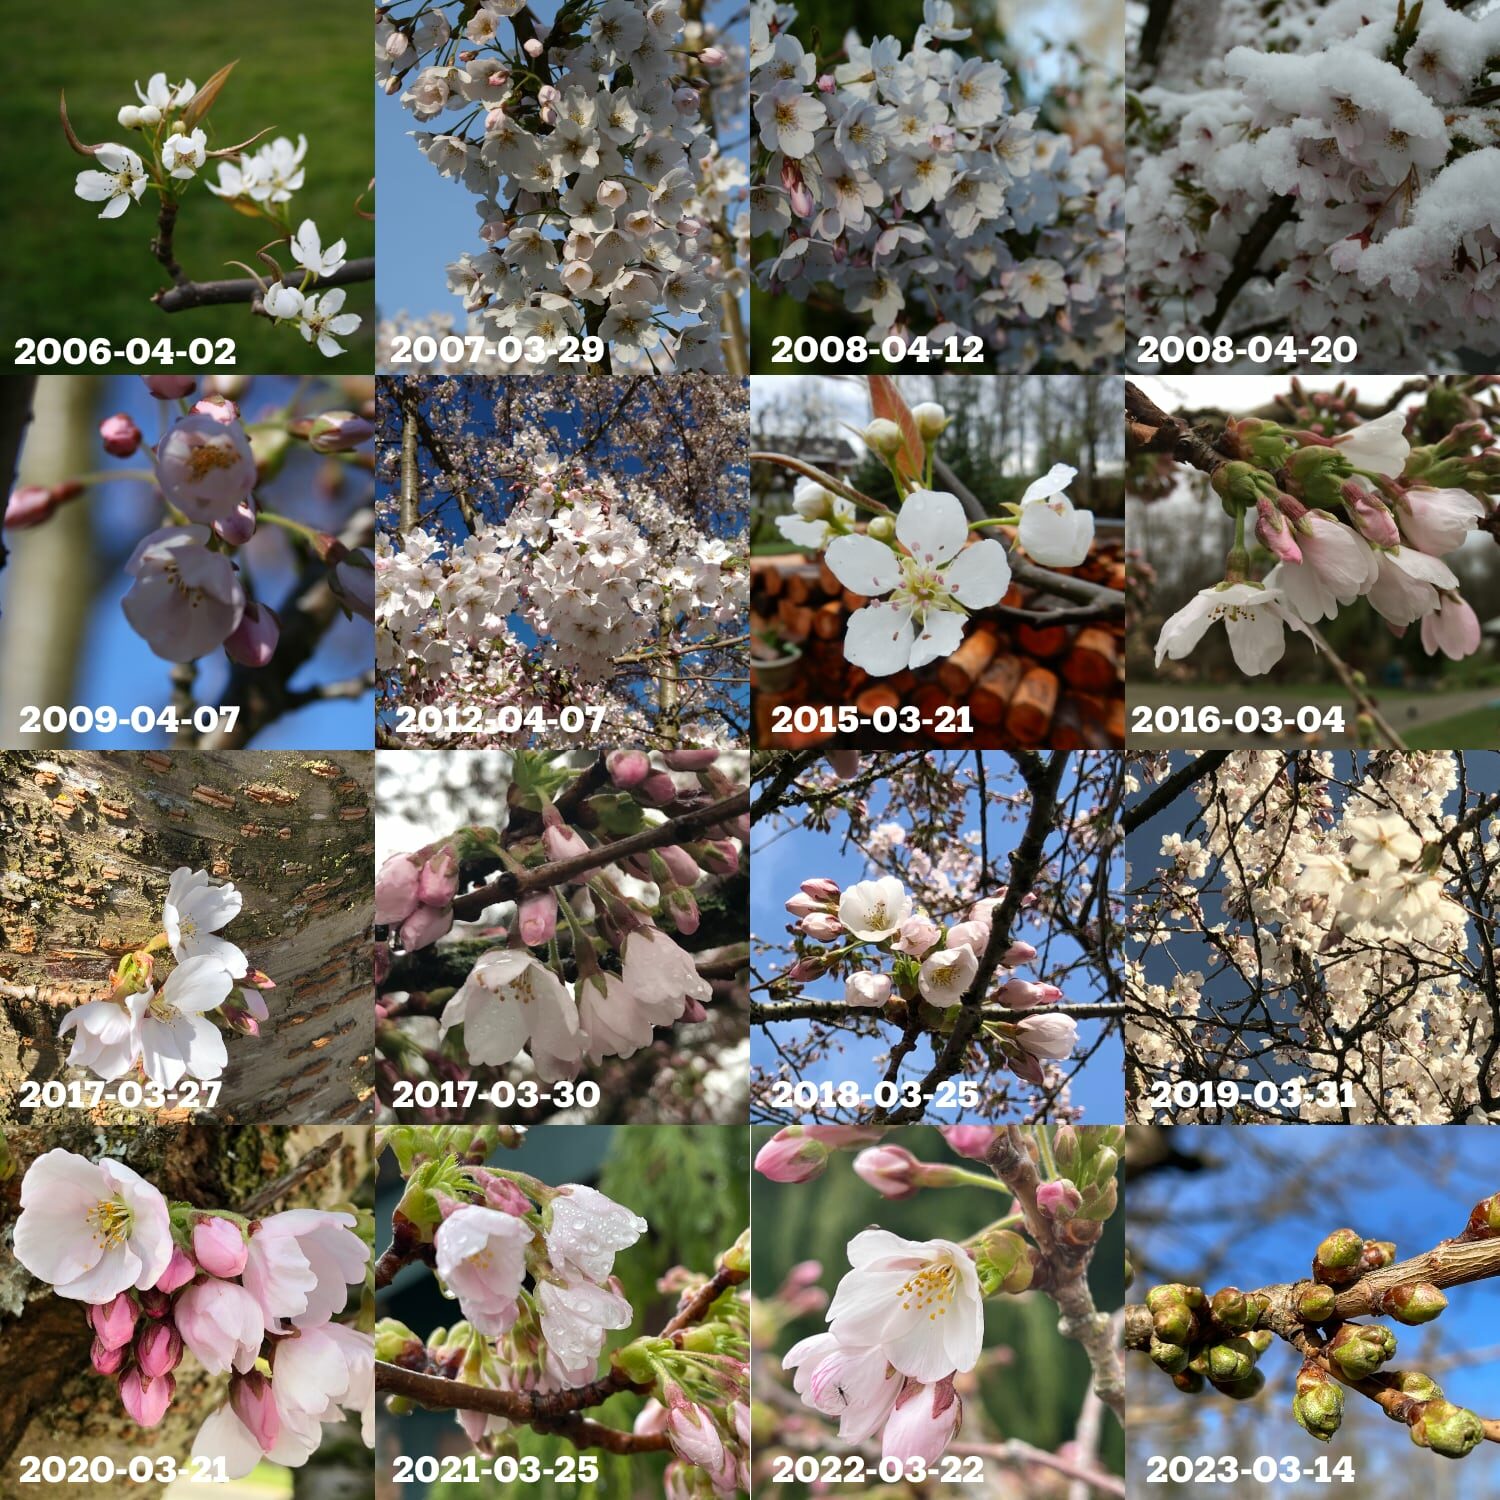 Cherry blossom blooms over the years